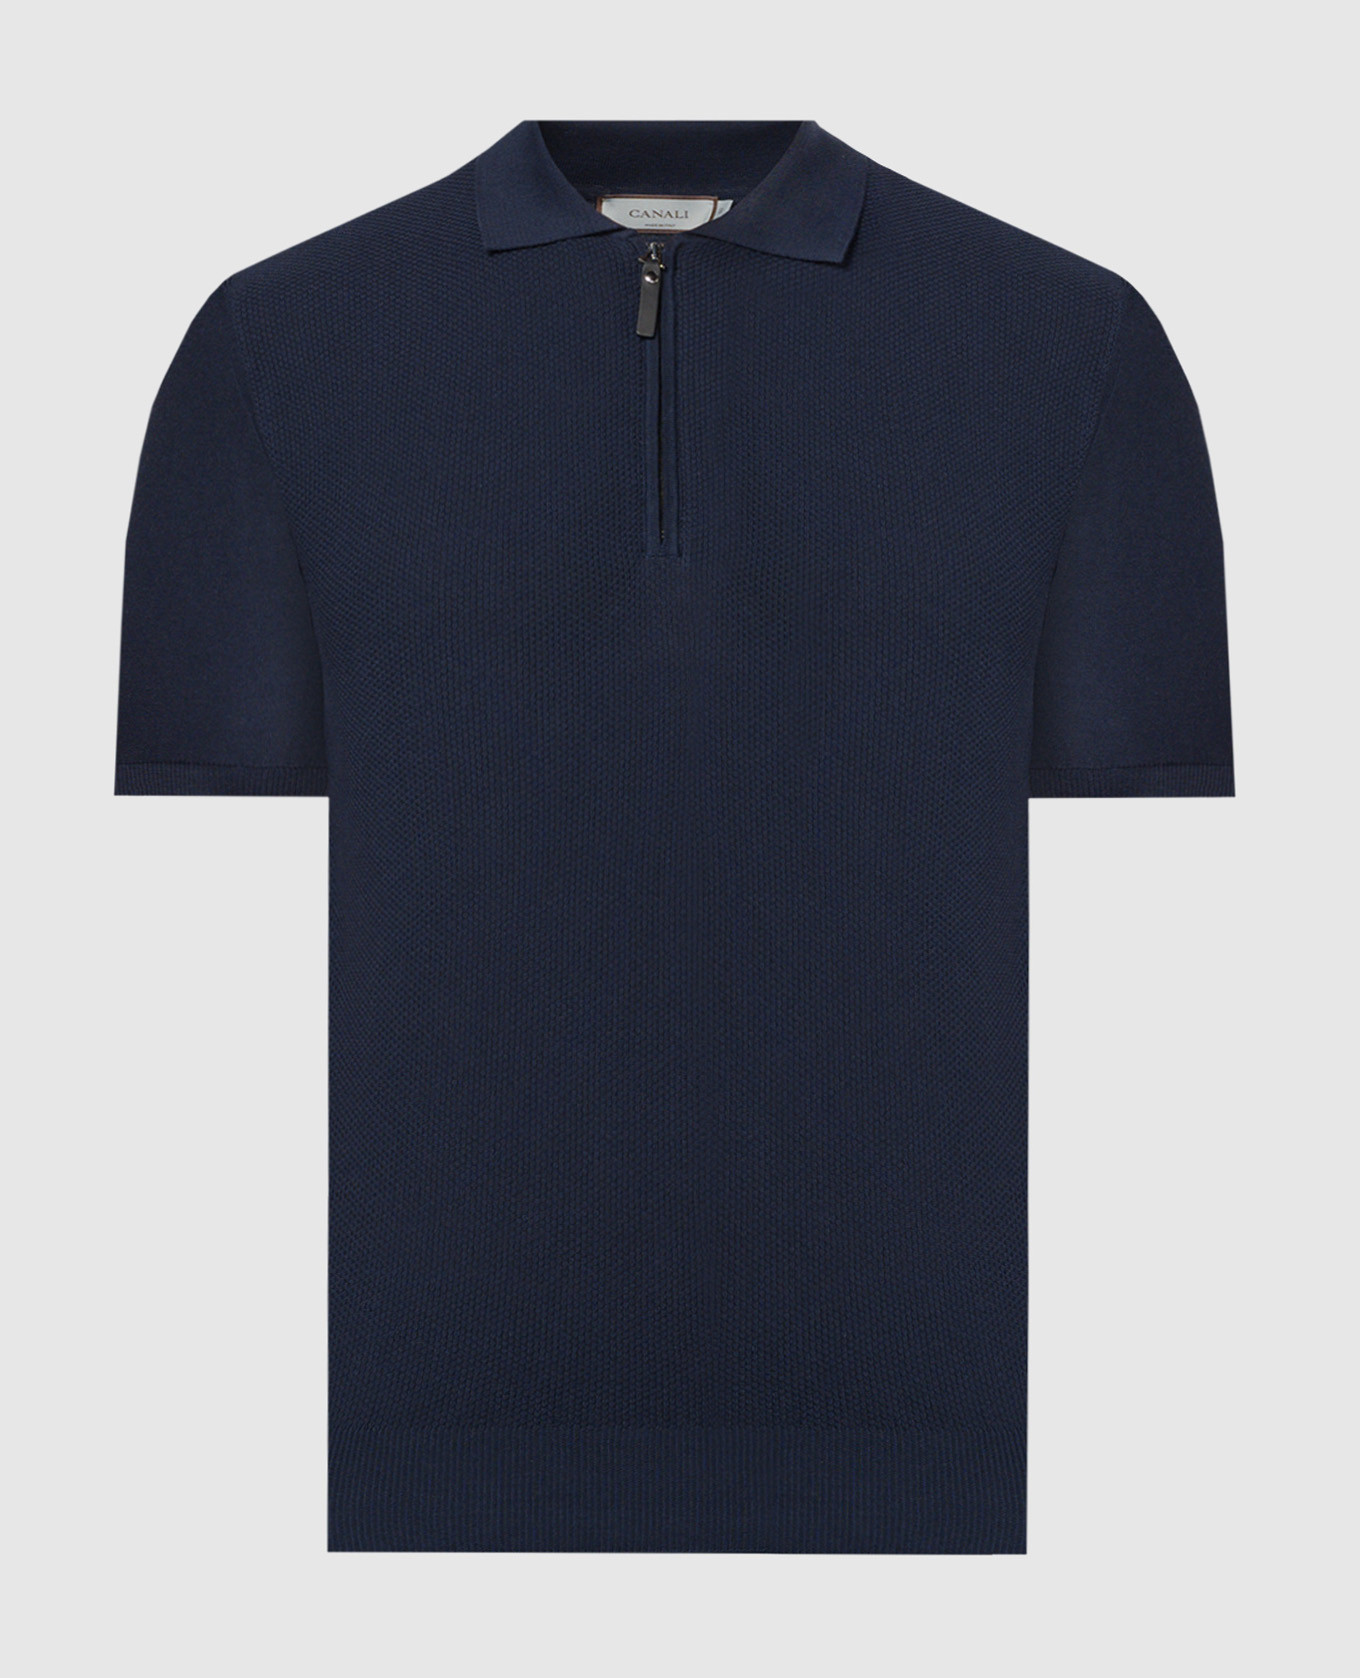 Blue polo in a woven pattern